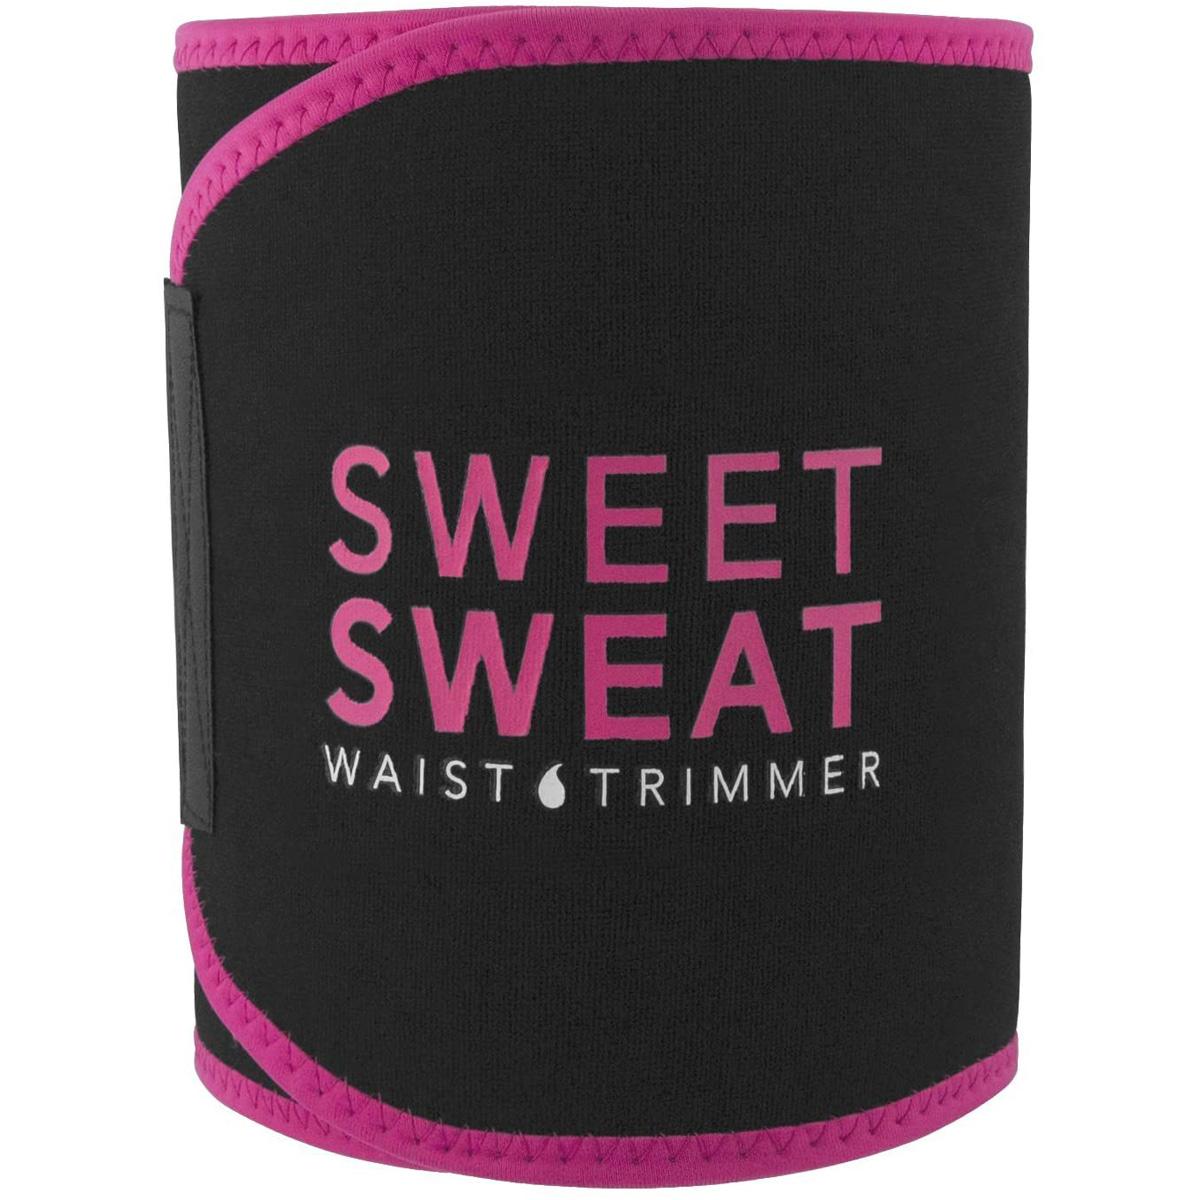 Sports Research Sweet Sweat Premium Waist Trimmer for $15.60